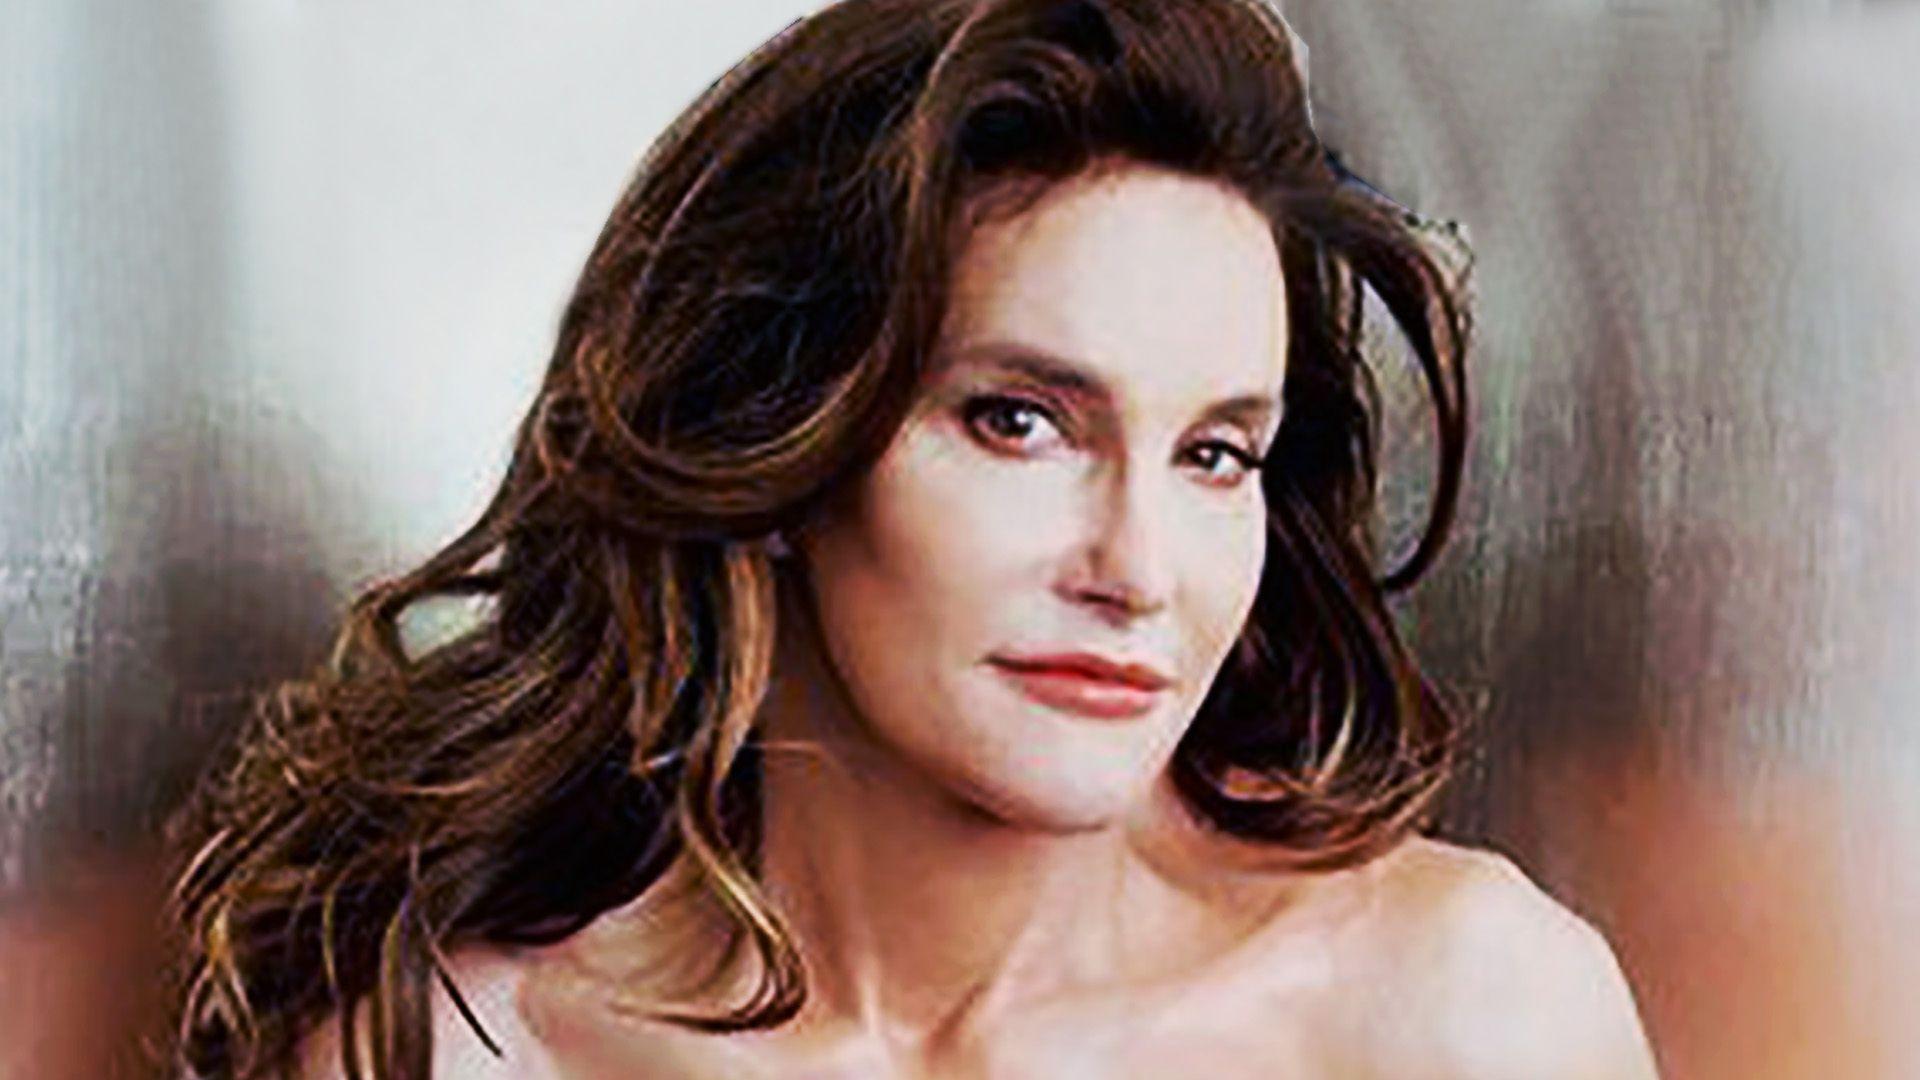 Caitlyn Jenner Wallpaper High Resolution and Quality Download